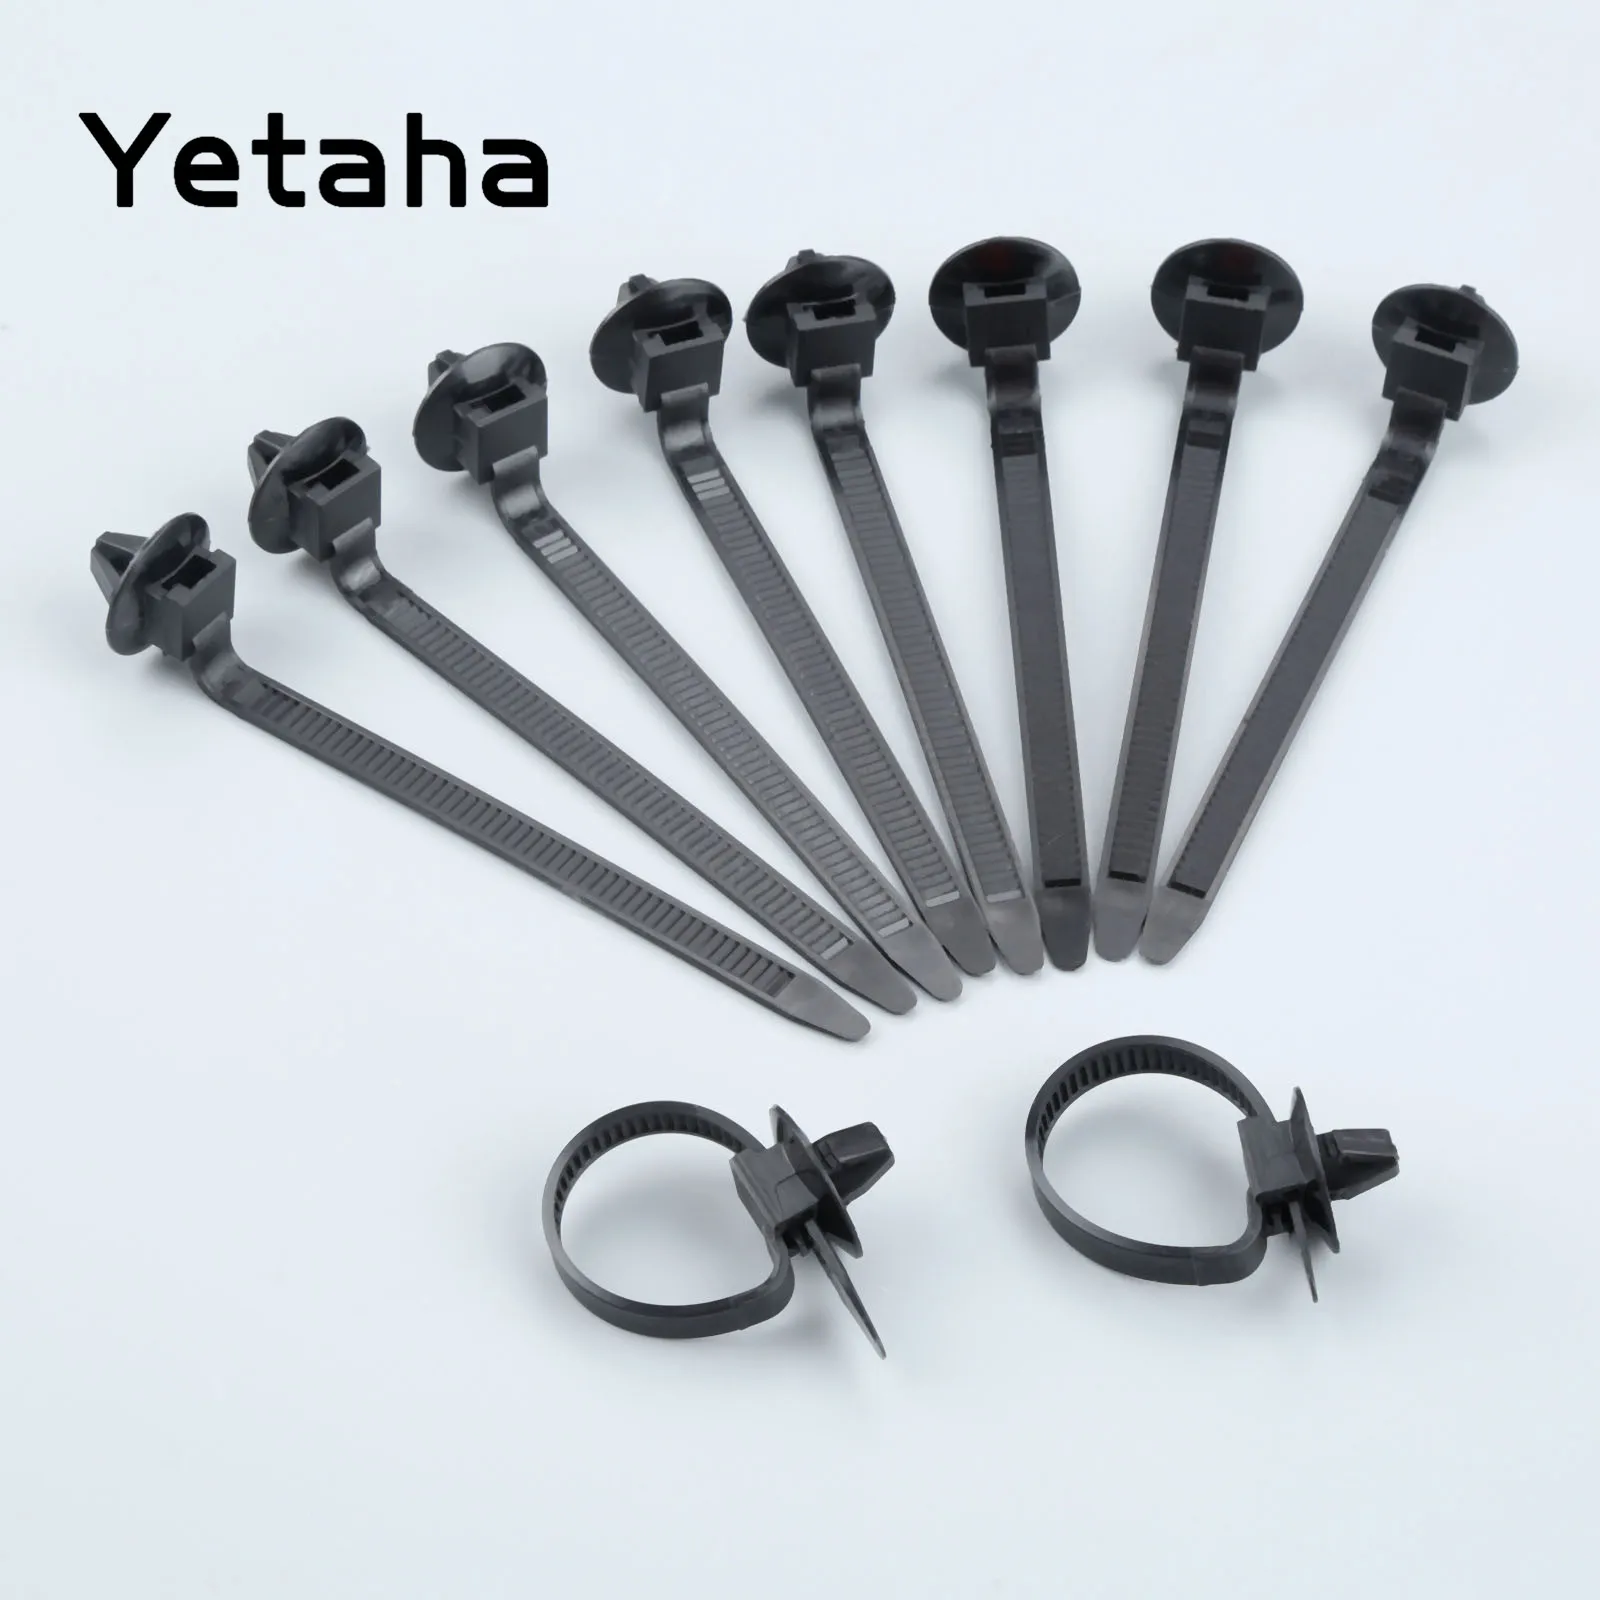 

Yetaha 50PCS Car Cable Fastening Ties Nylon Black Car Auto Cable Strap Push Mount Wire Tie Retainer Clip Clamp